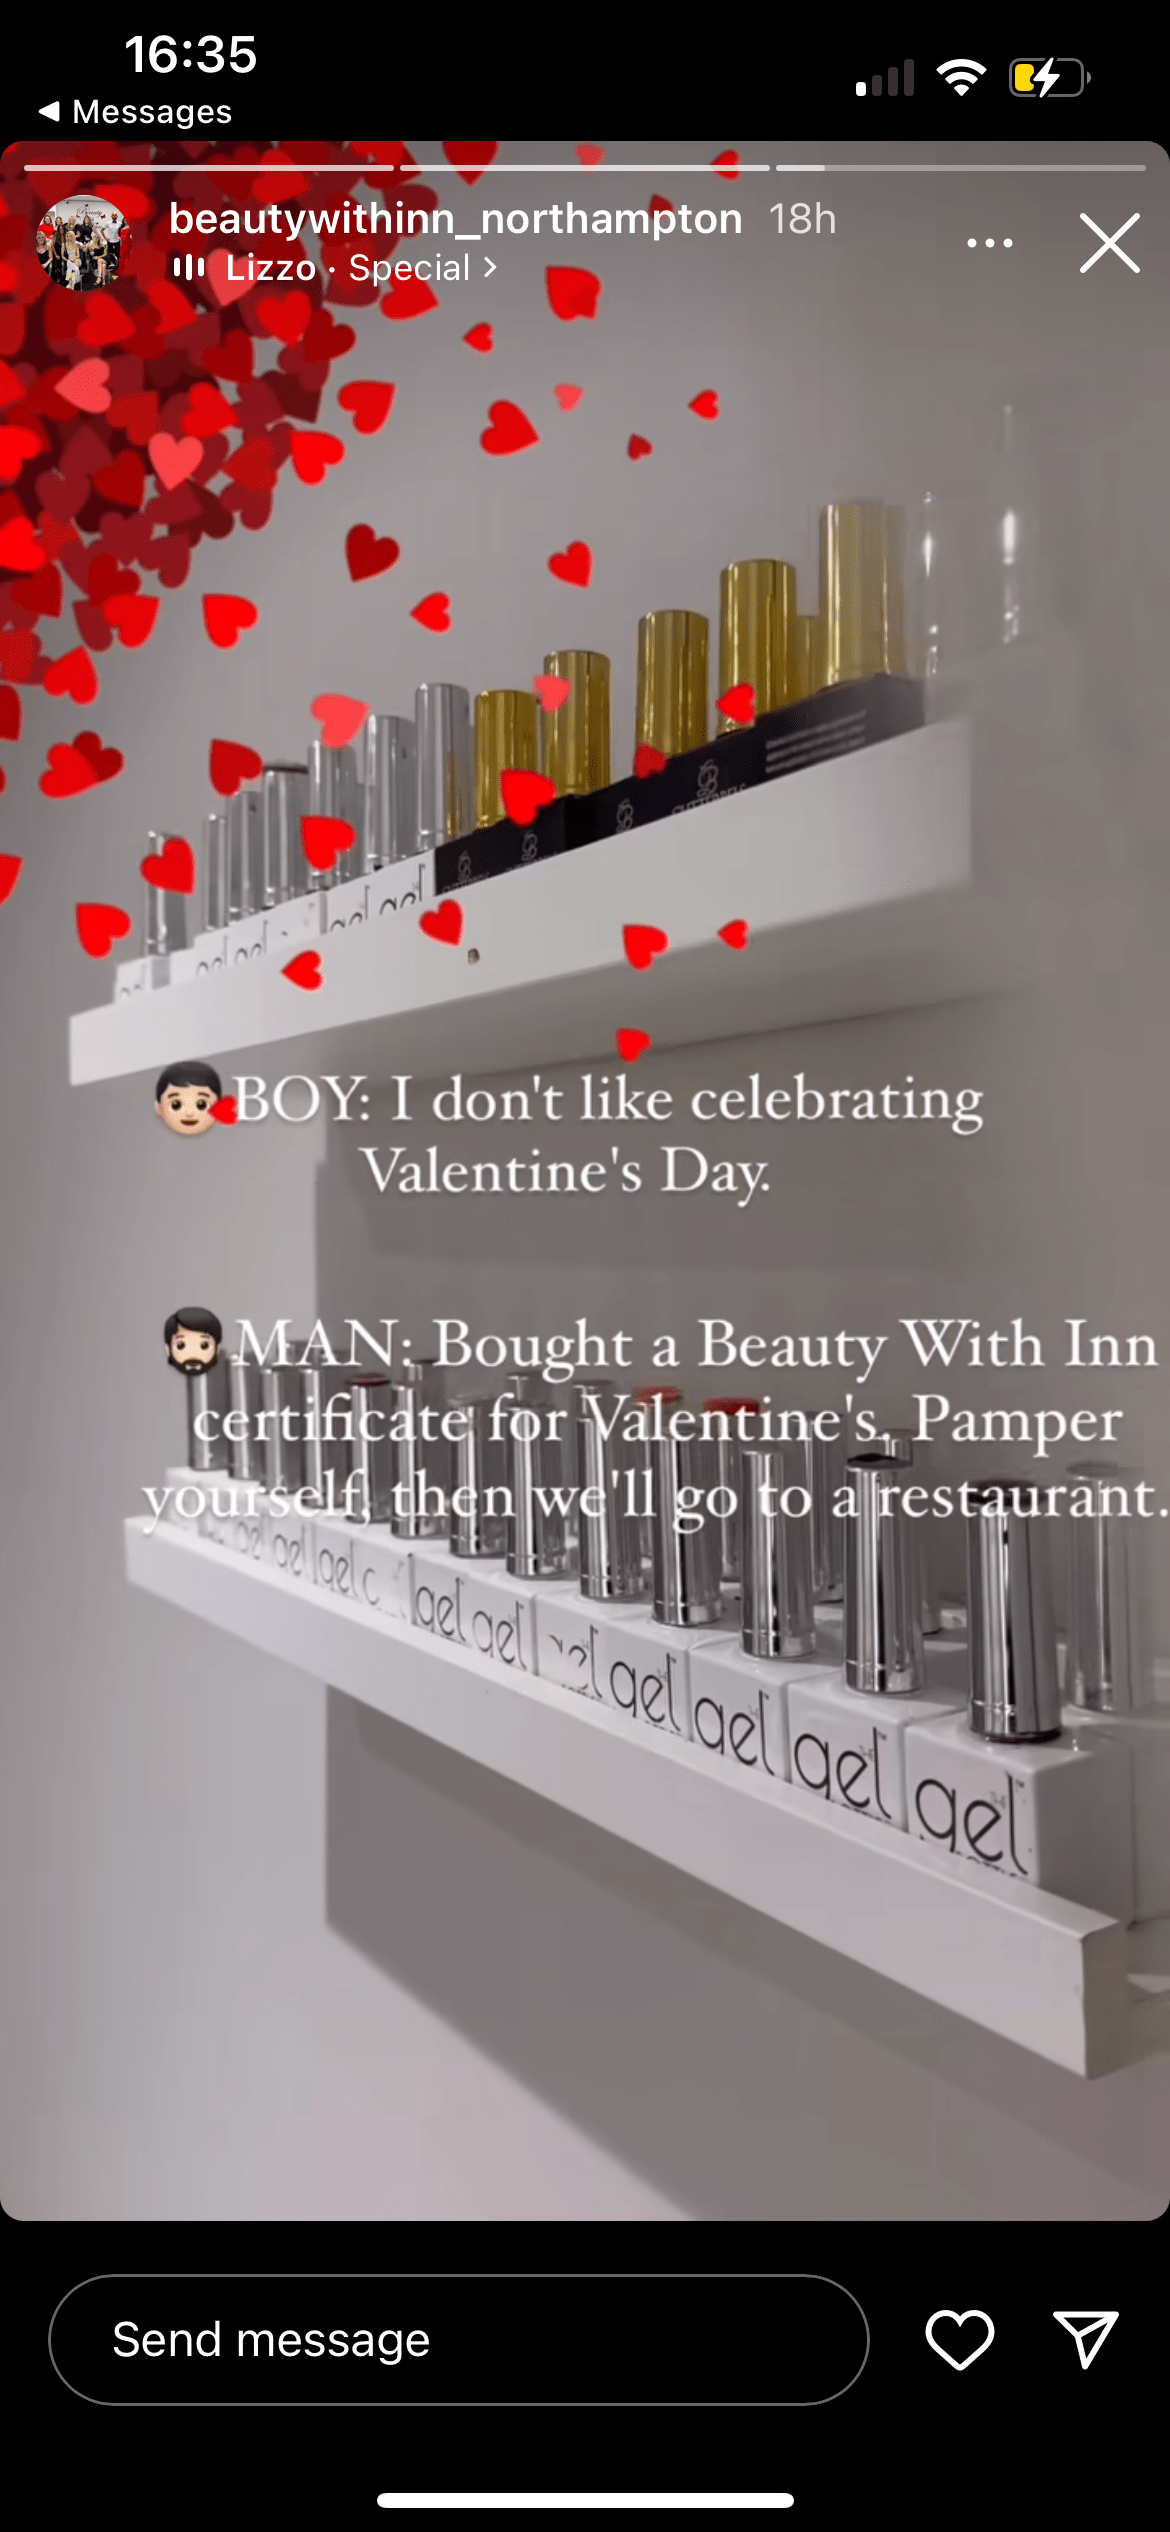 Valentines at Beautywithinn | Northamptonshire Chamber of Commerce